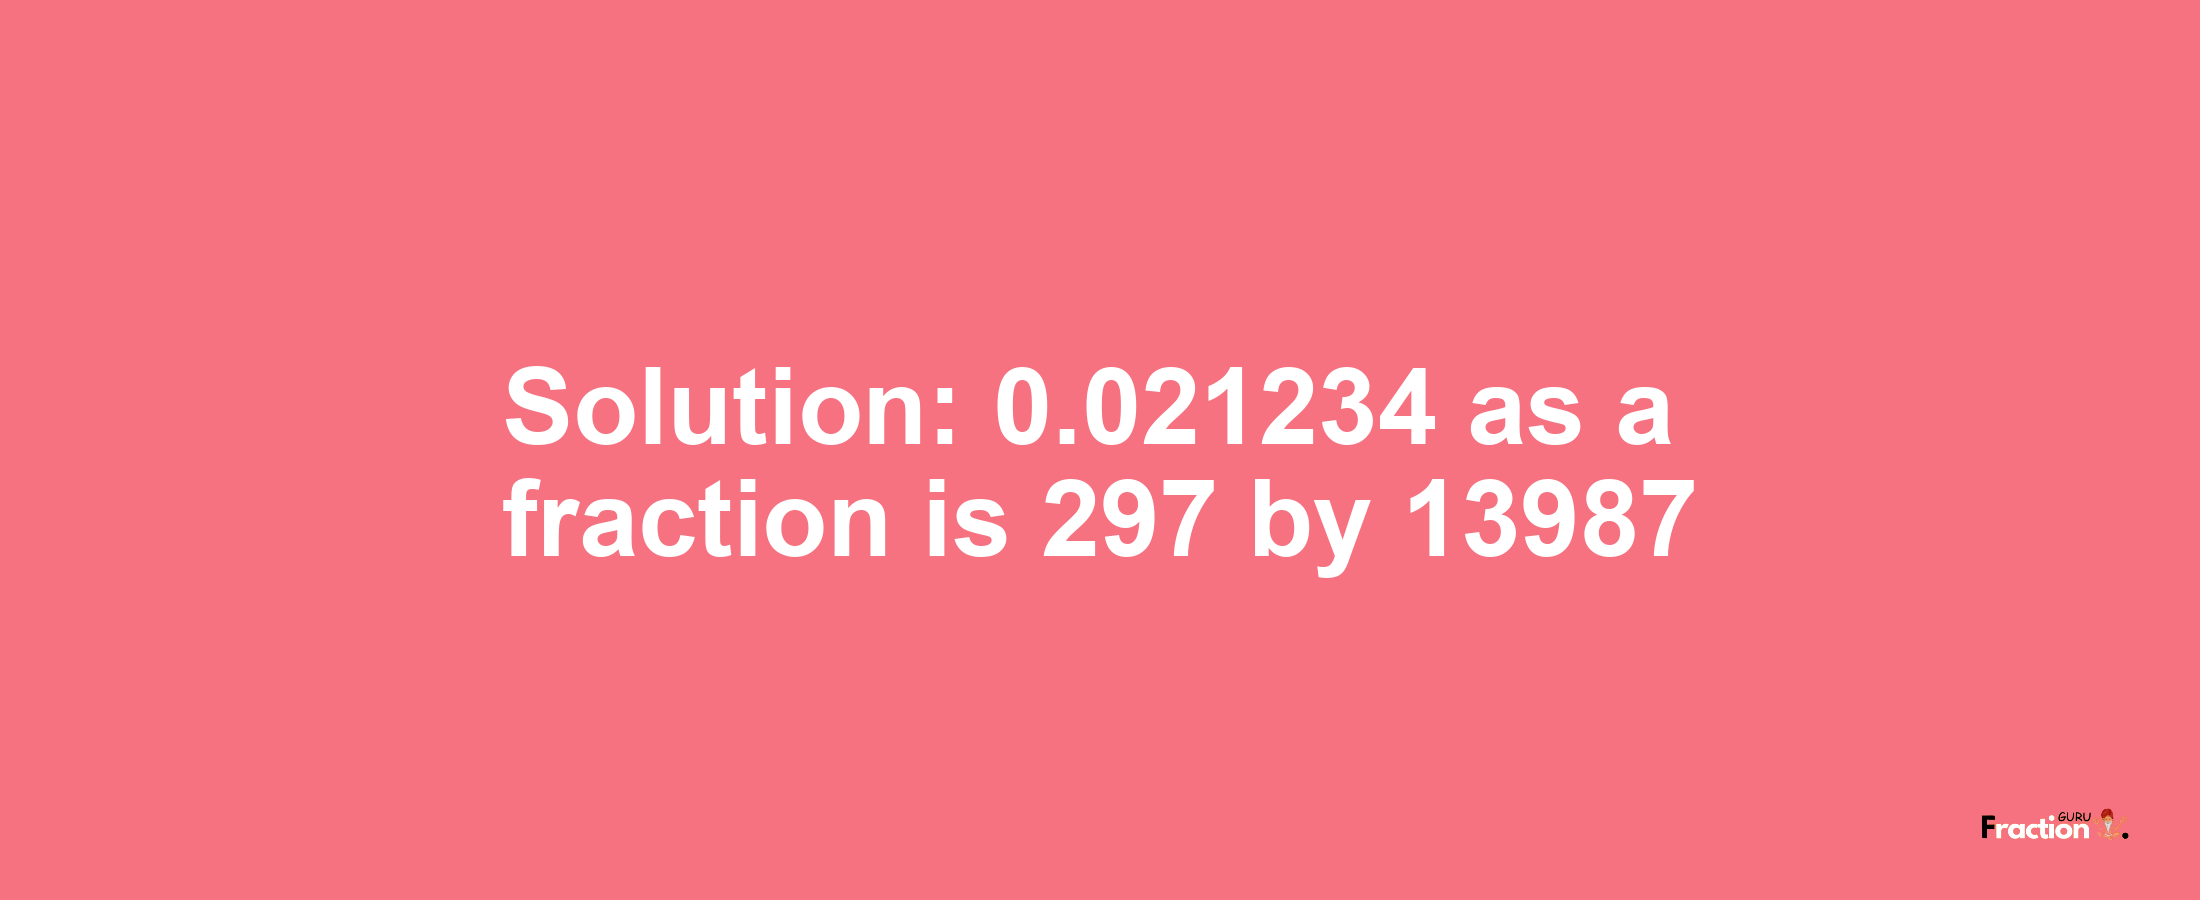 Solution:0.021234 as a fraction is 297/13987